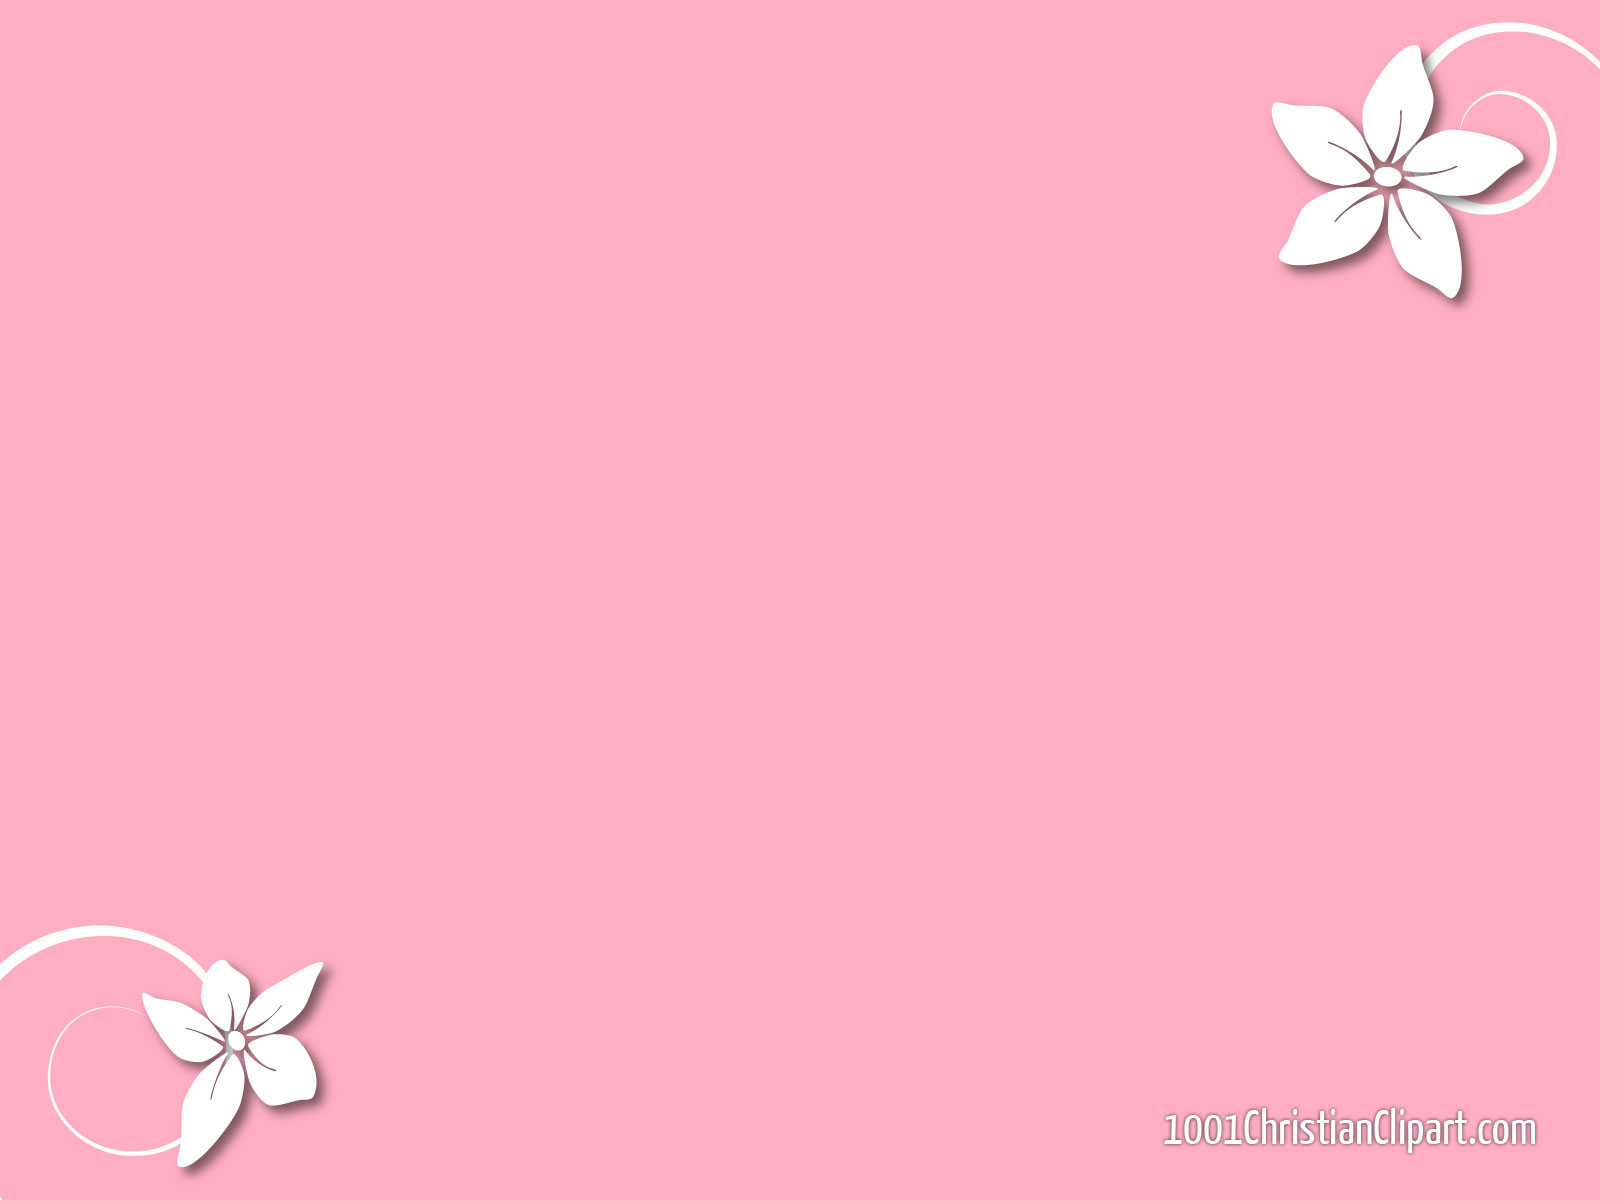 There Is 20 Pacifier Border Background Free Cliparts All Used For Free